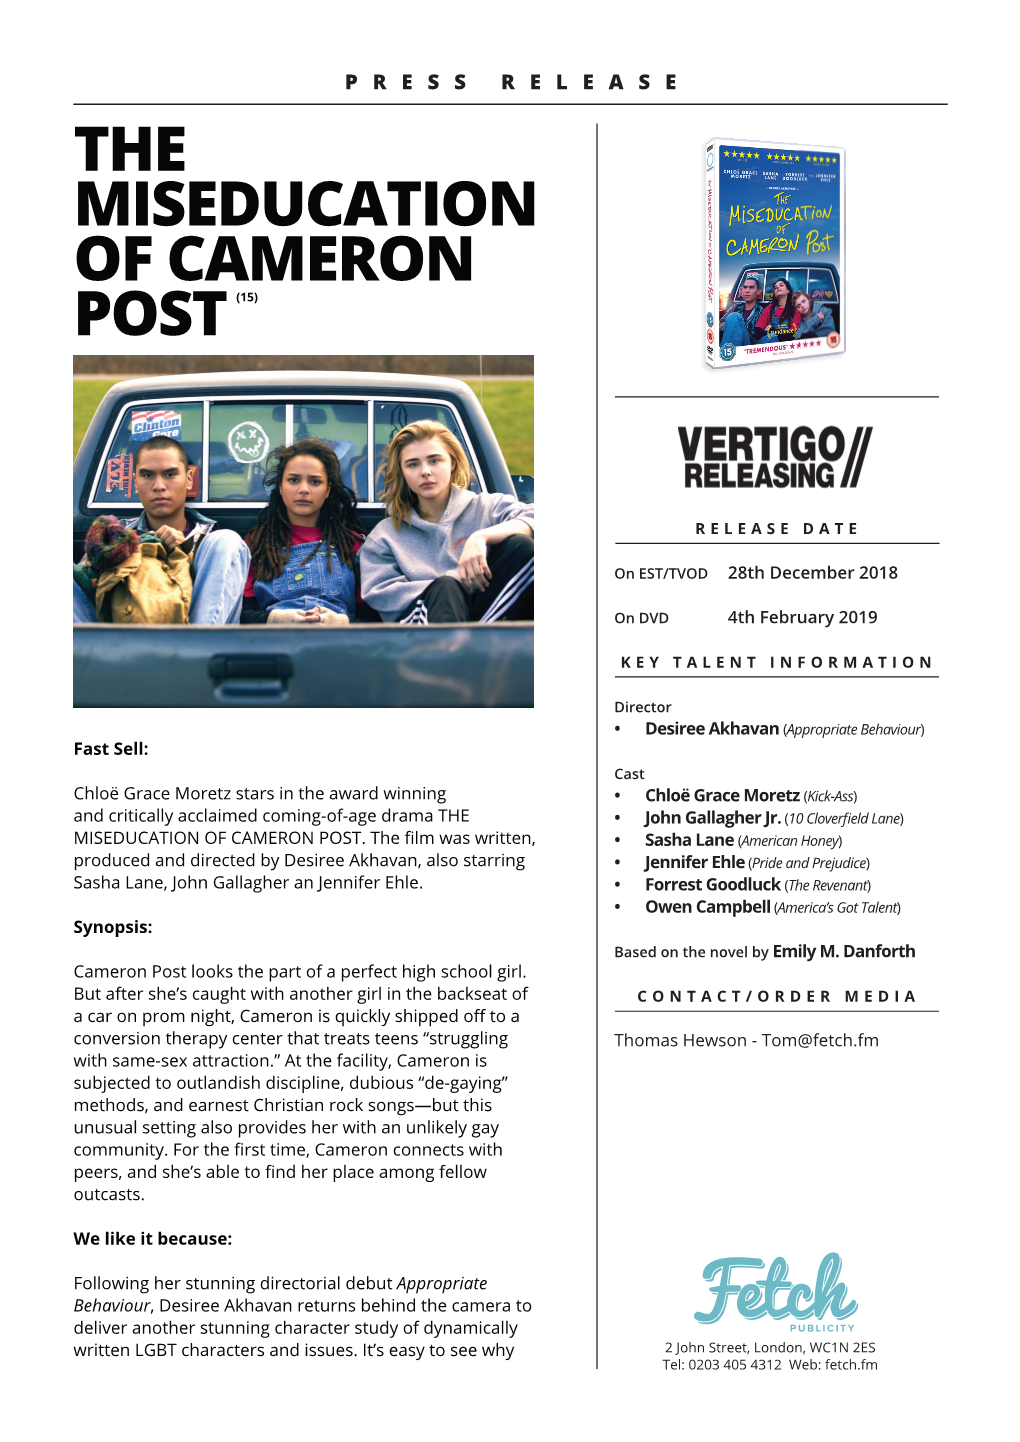 The Miseducation of Cameron Post Press Release V3.Indd